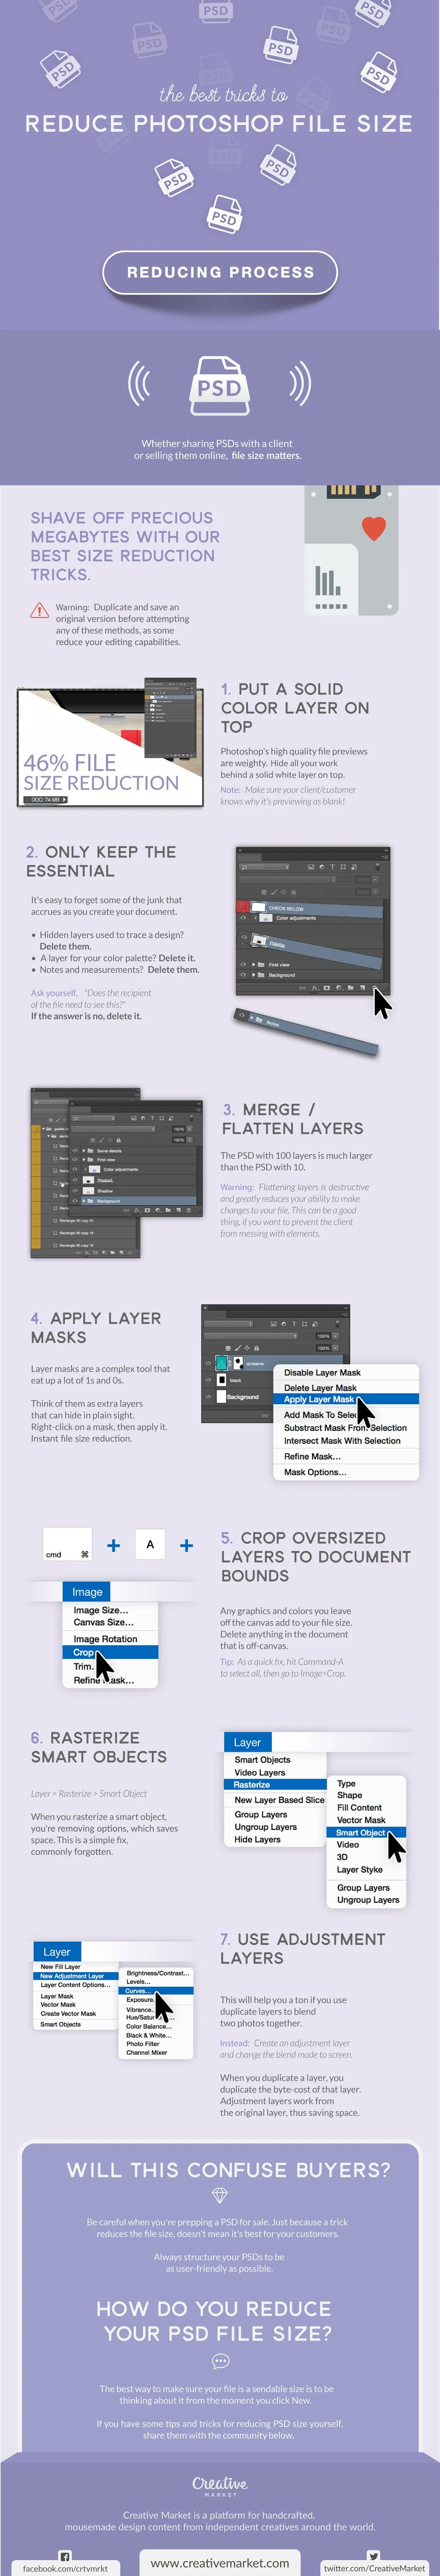 The Best Tricks to Reduce Photoshop File Size - #infographic